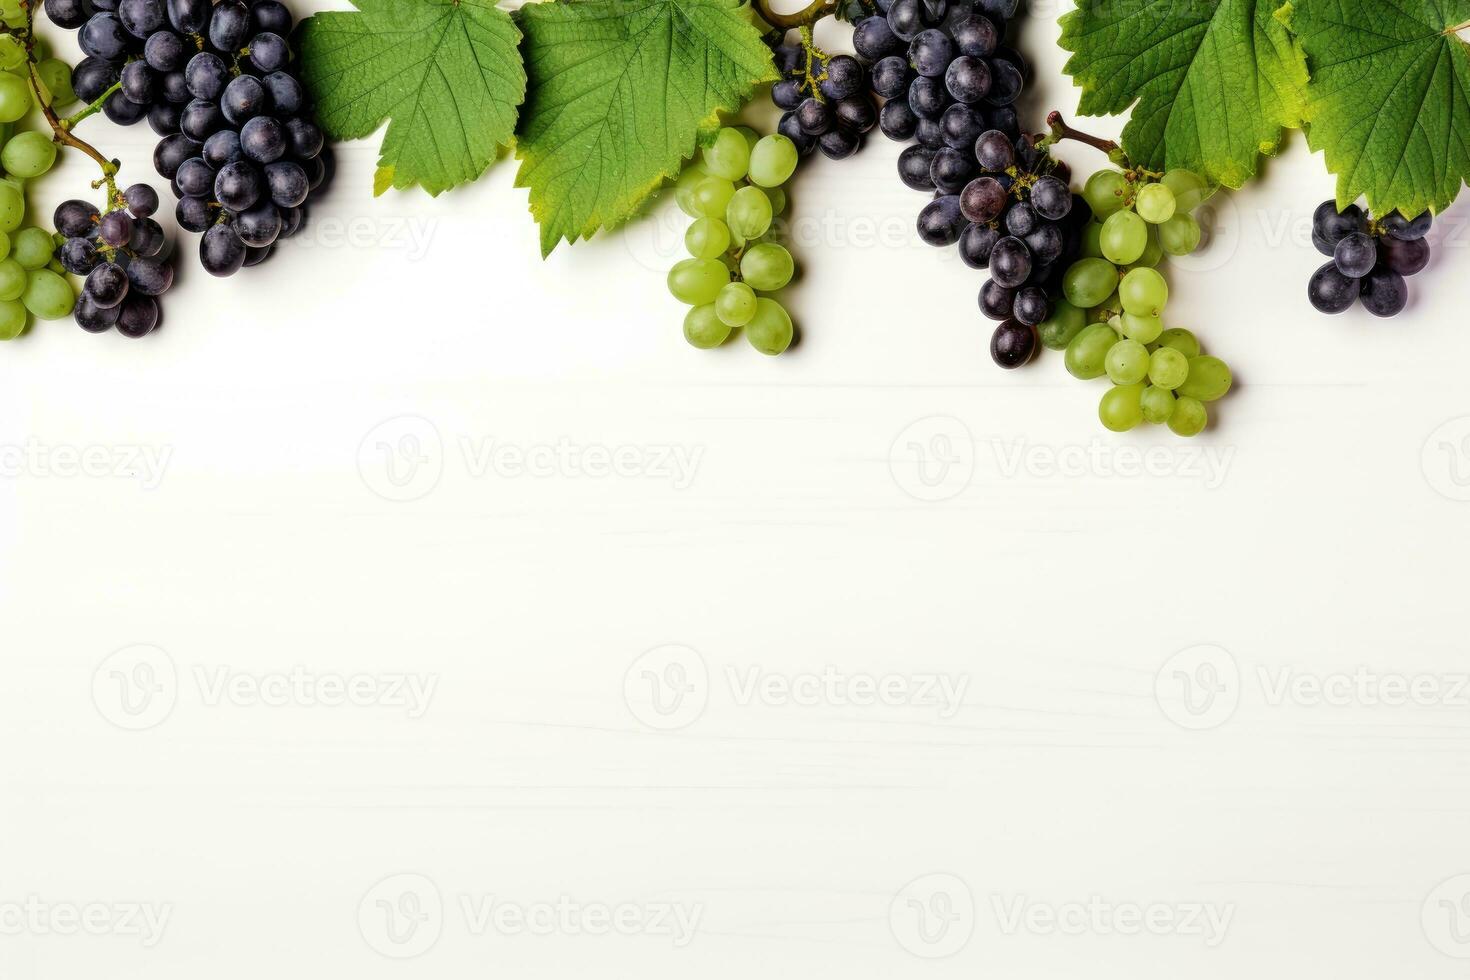 Black juicy grapes on white background. Autumn frame made of grapes. photo